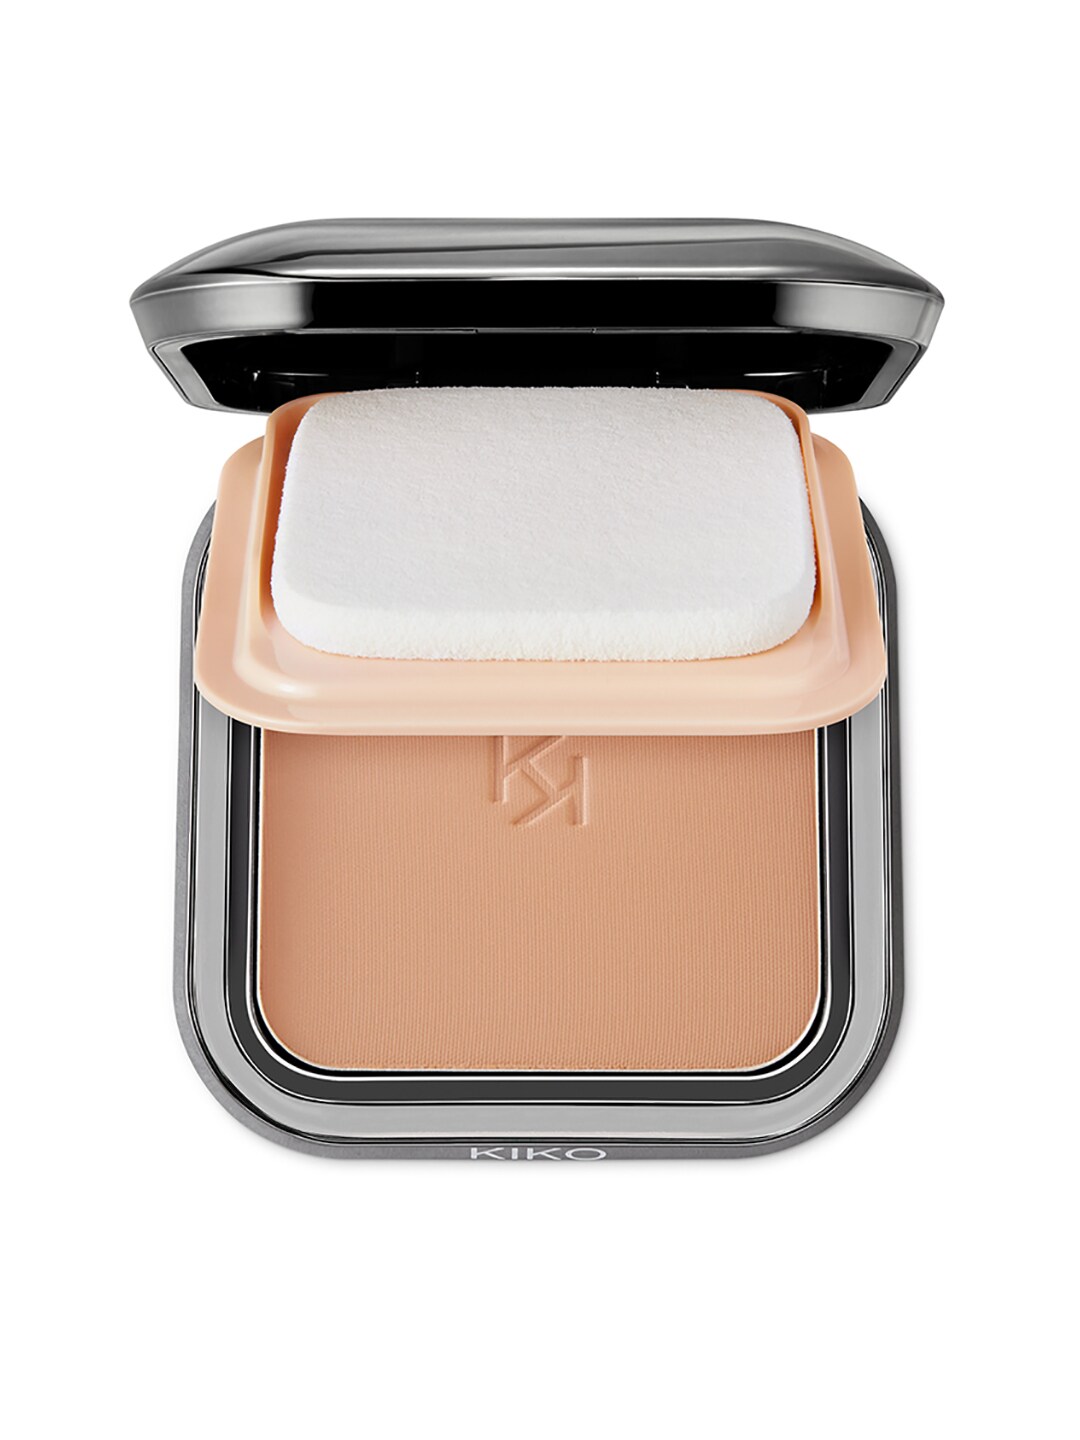 KIKO MILANO Weightless Perfection SPF 30 Wet and Dry Powder Foundation N95 Price in India